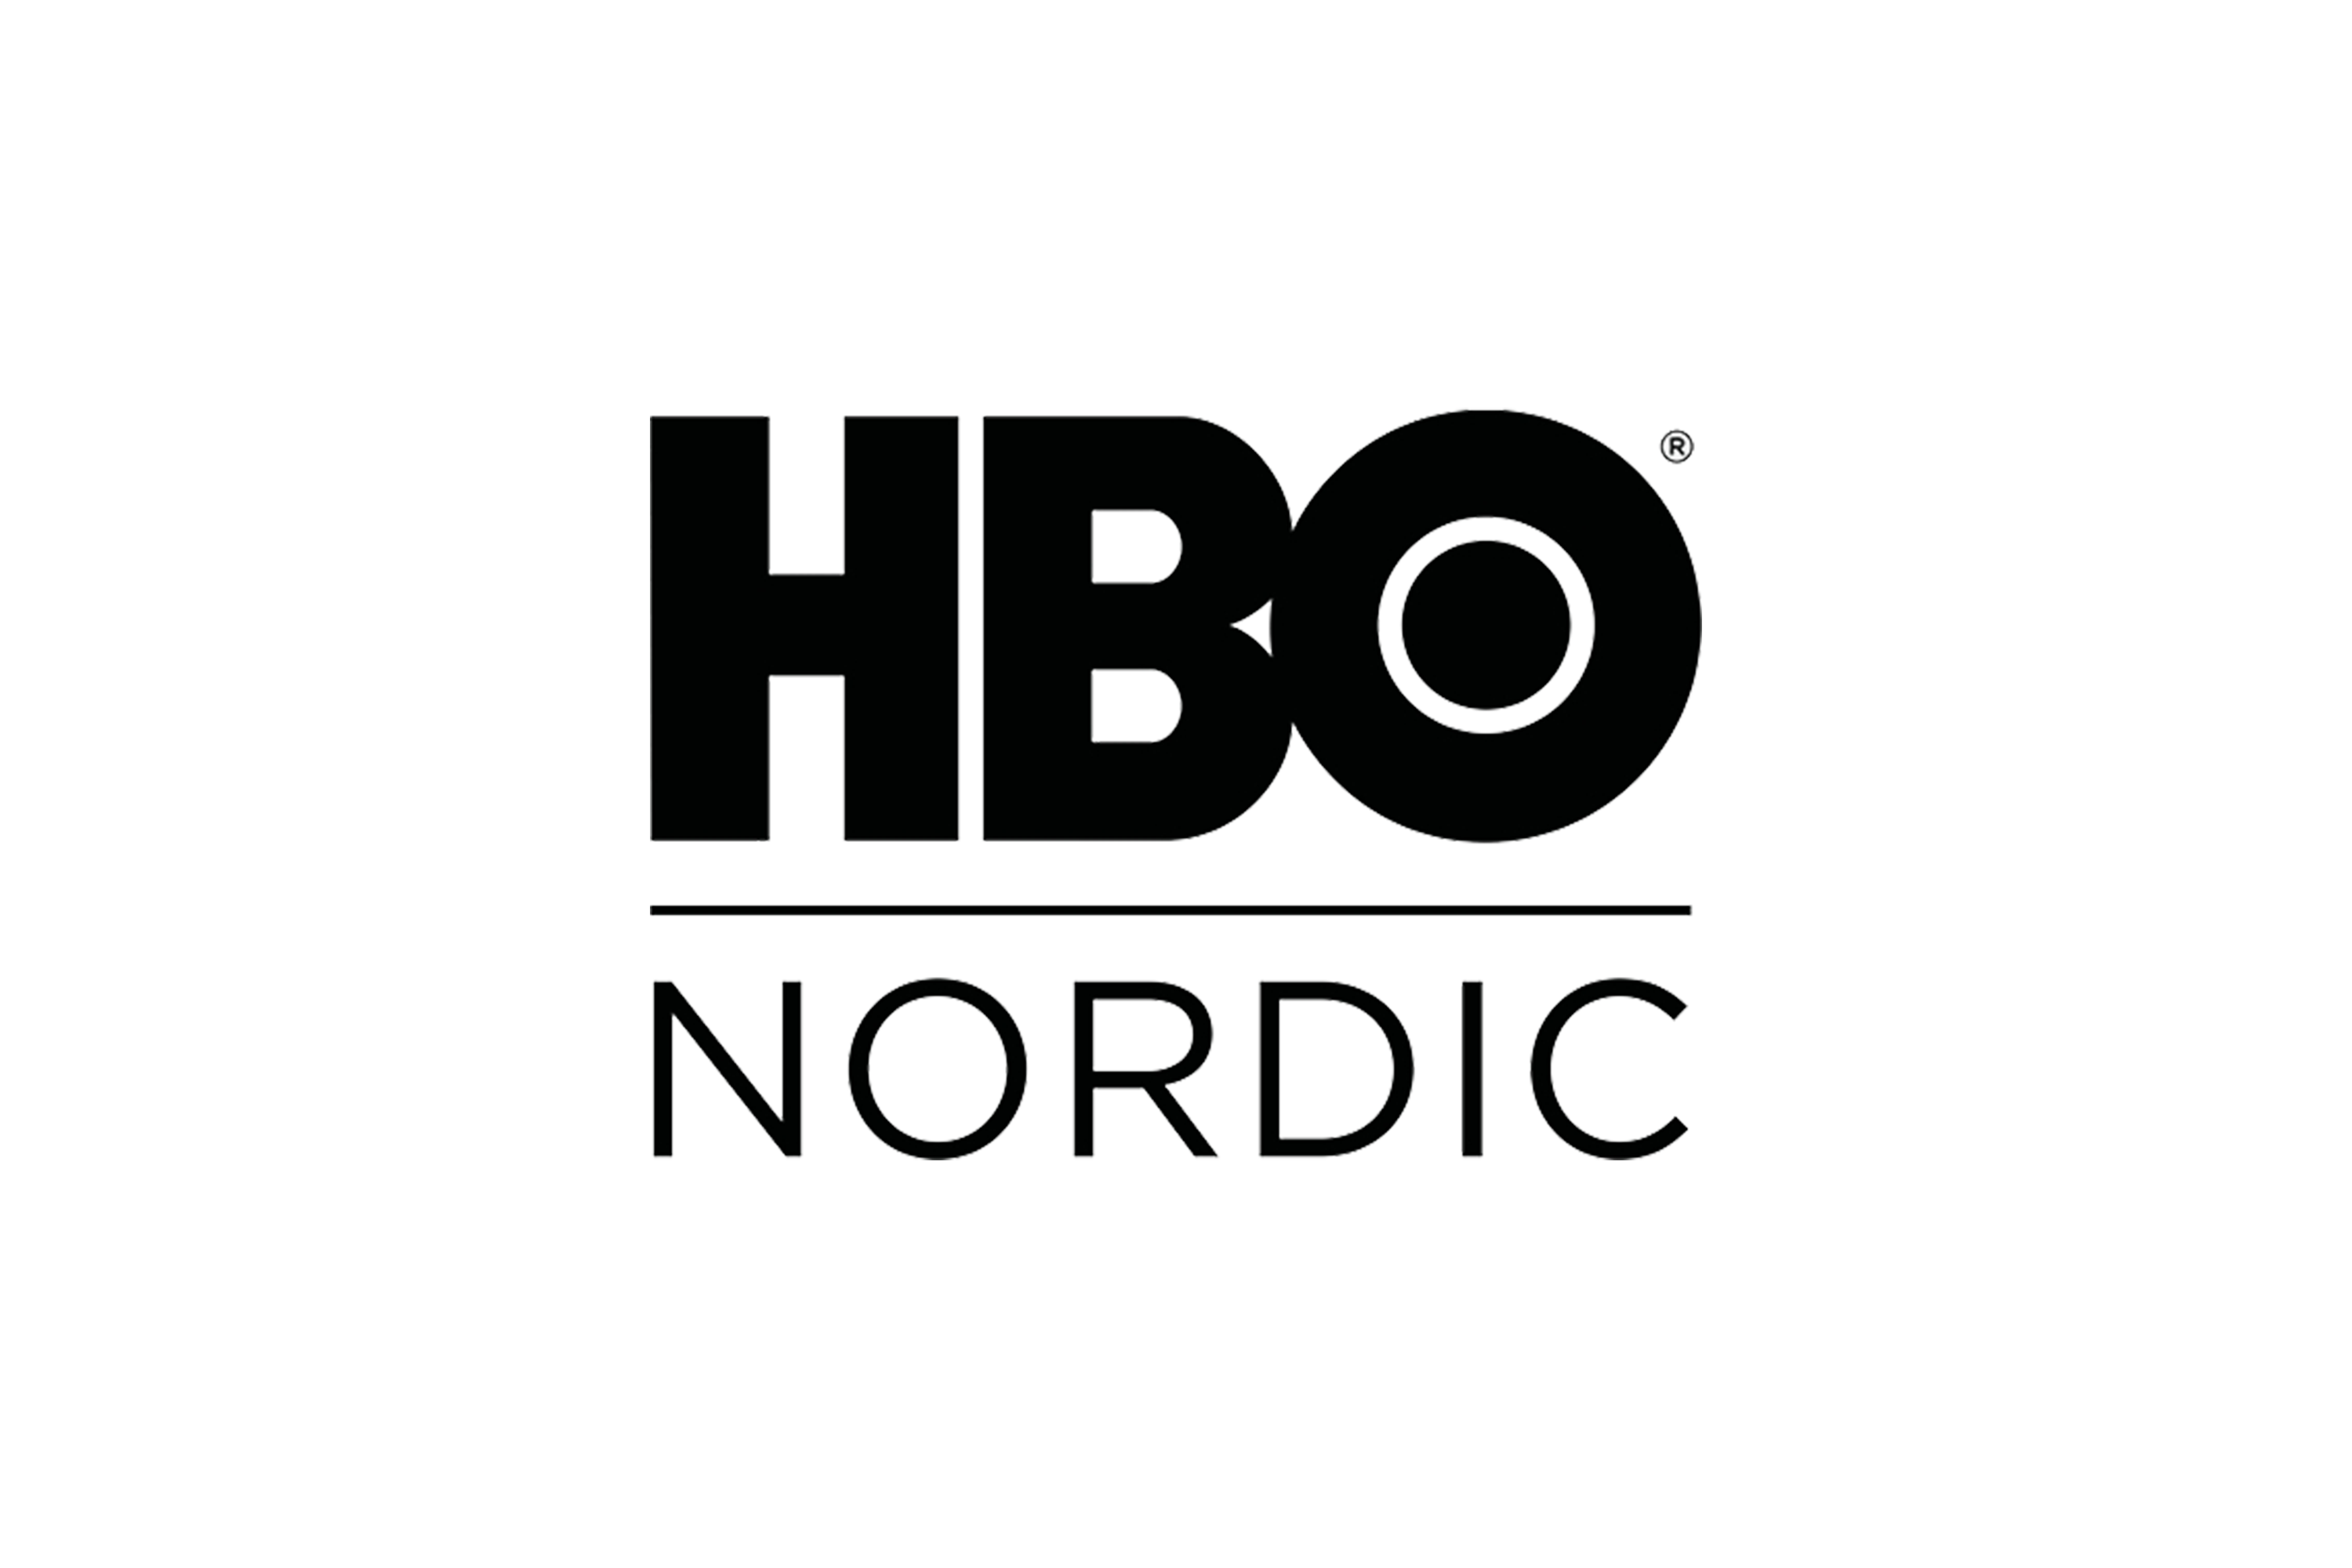 HBO Nordic test